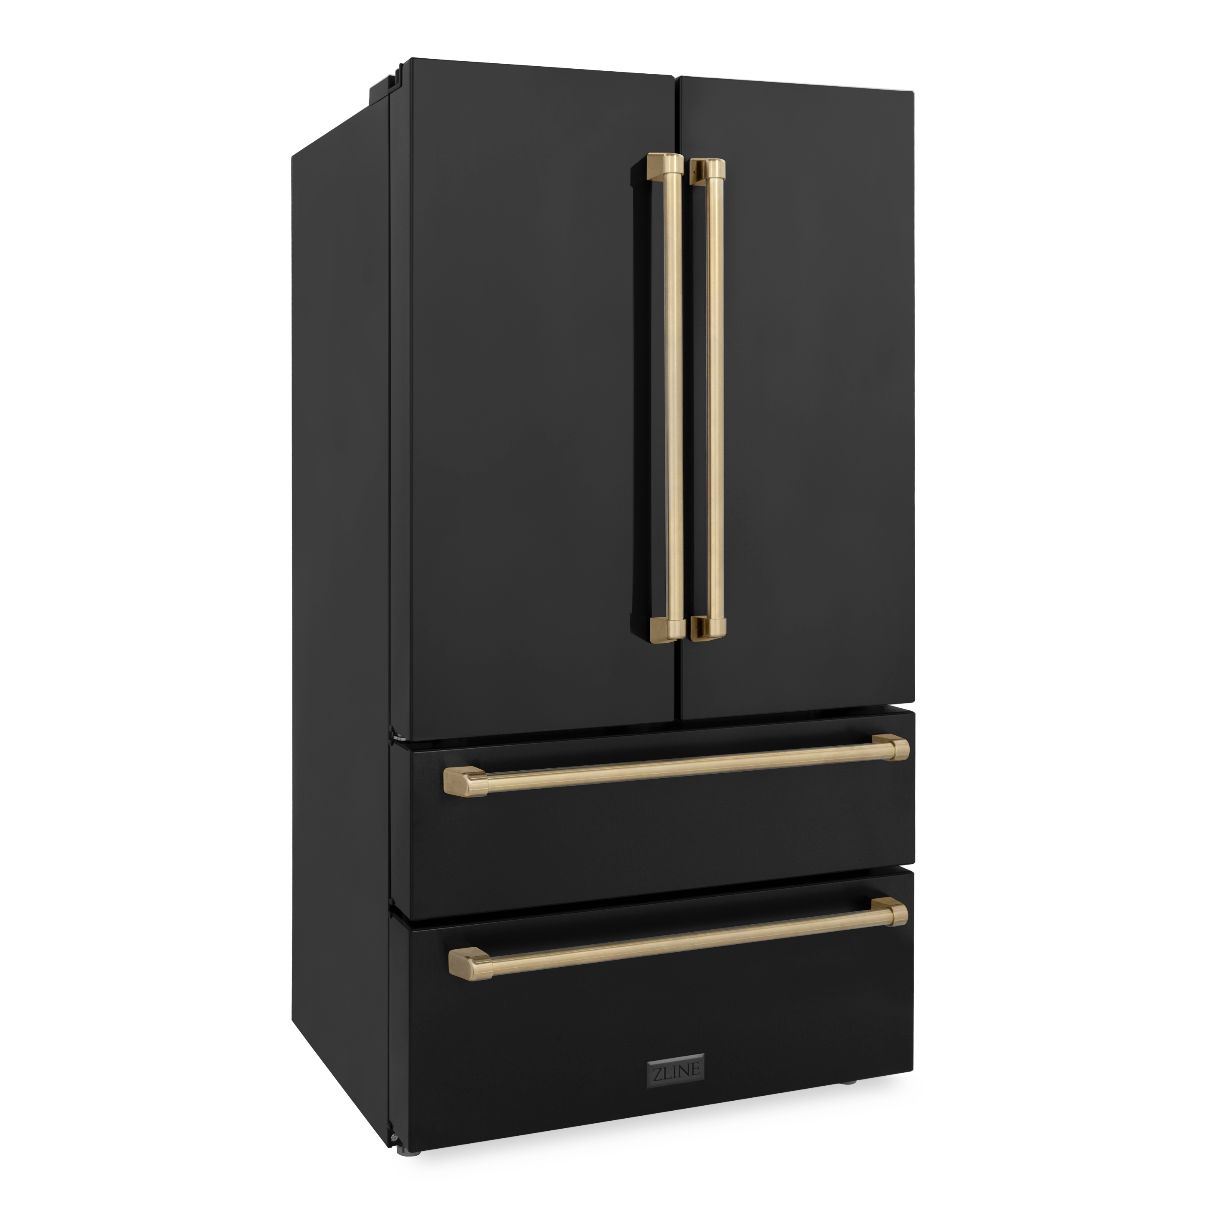 ZLINE 36 in. Autograph Edition French Door Refrigerator with Ice Maker in Black Stainless Steel with Champagne Bronze Accents side.